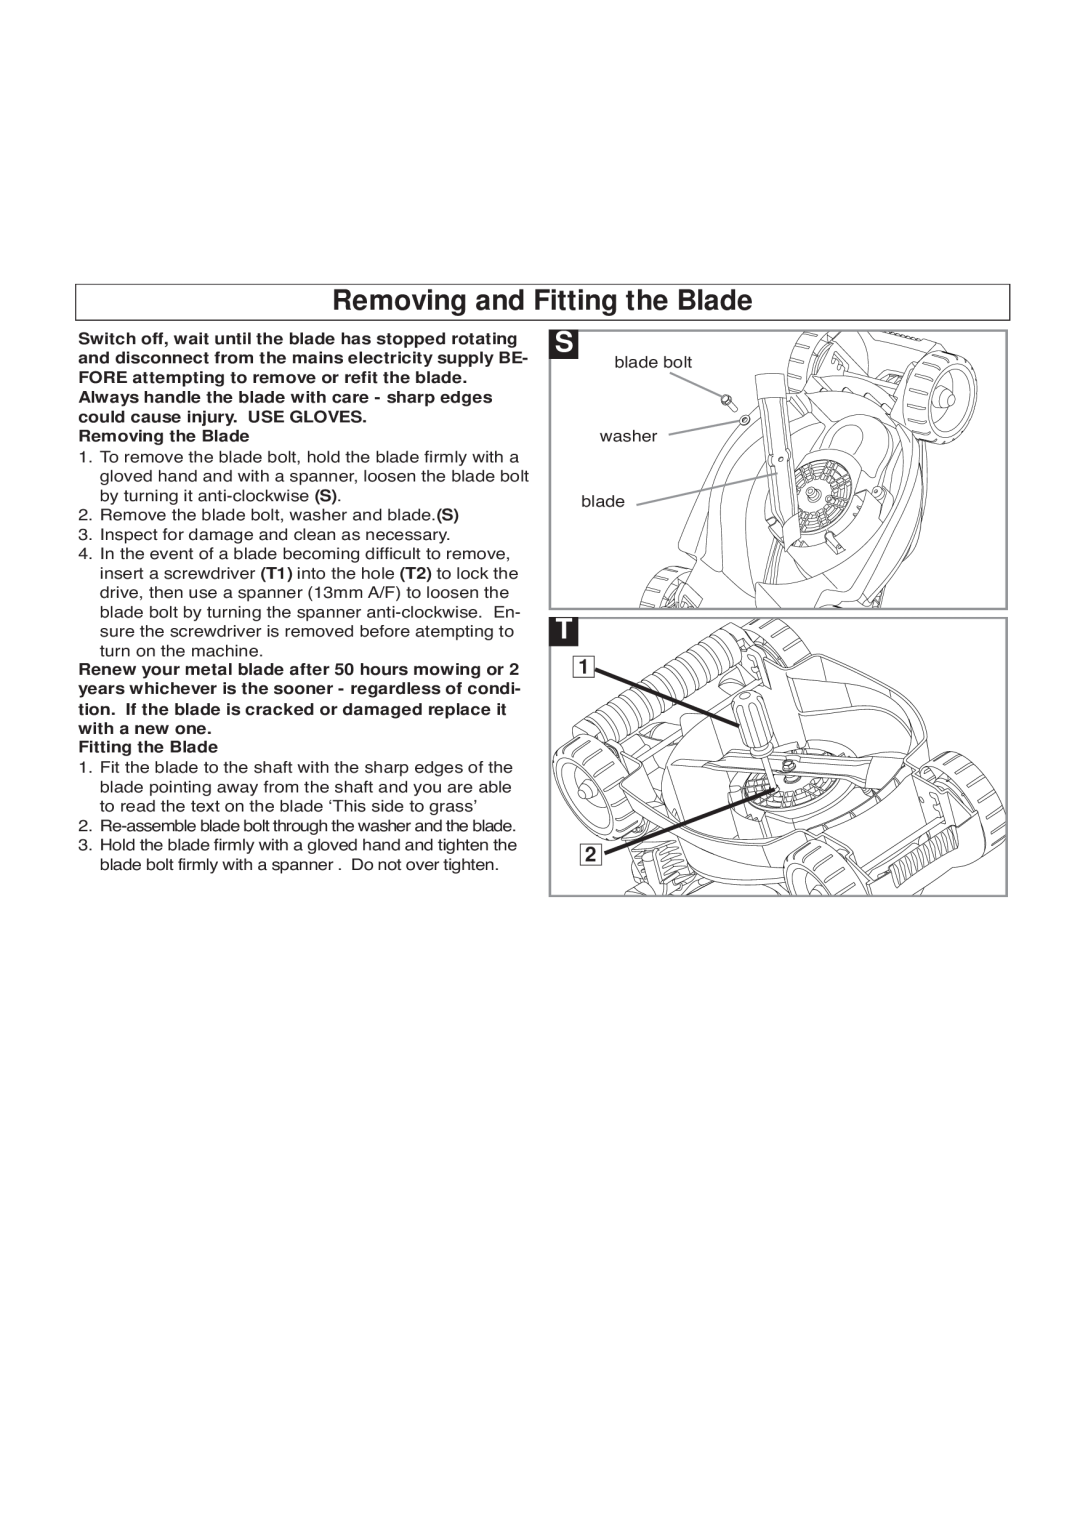 Flymo EM032, VM032, VTR32, RM032 manual Removing and Fitting the Blade, Removing the Blade 